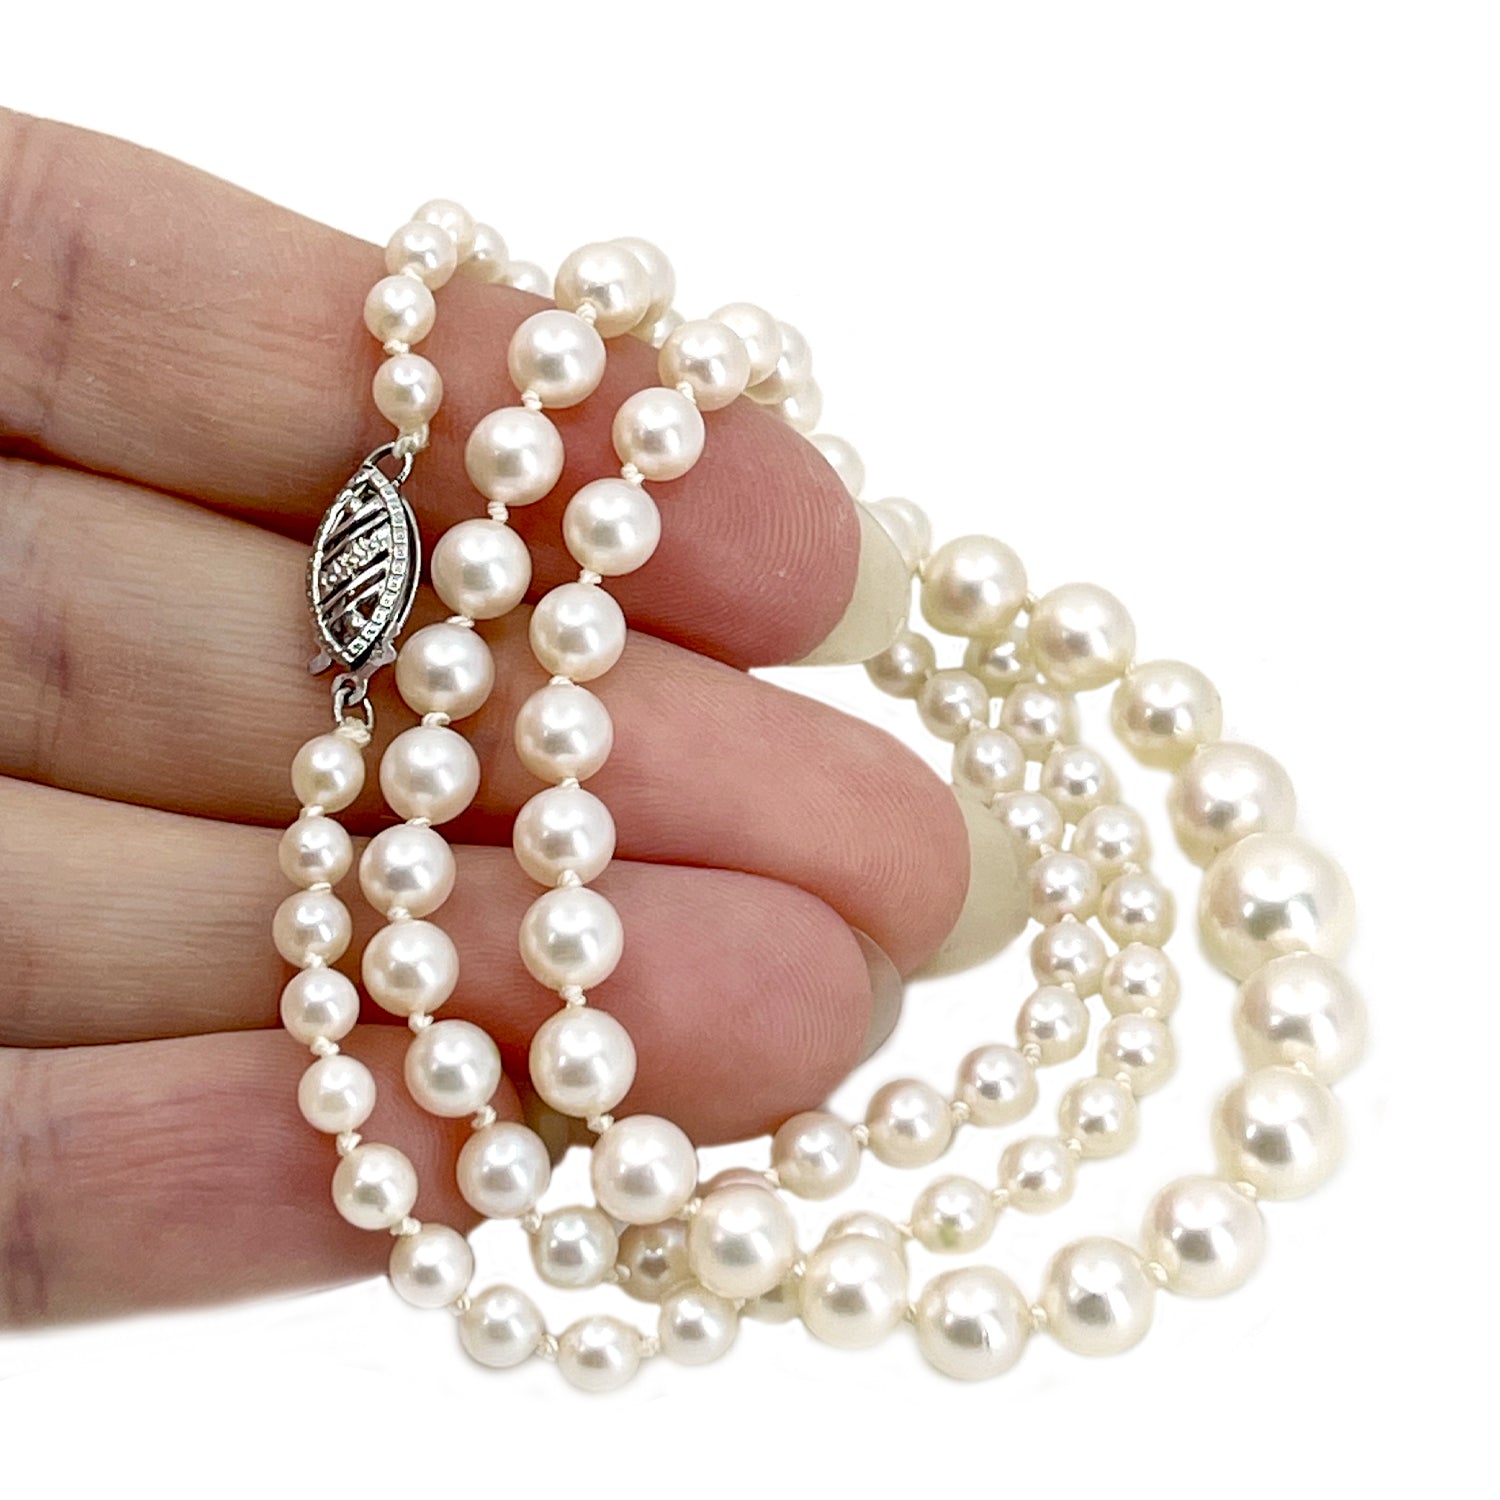 Vintage Filigree Graduated Japanese Saltwater Cultured Akoya Pearl Necklace - 10K White Gold 19.25 Inch